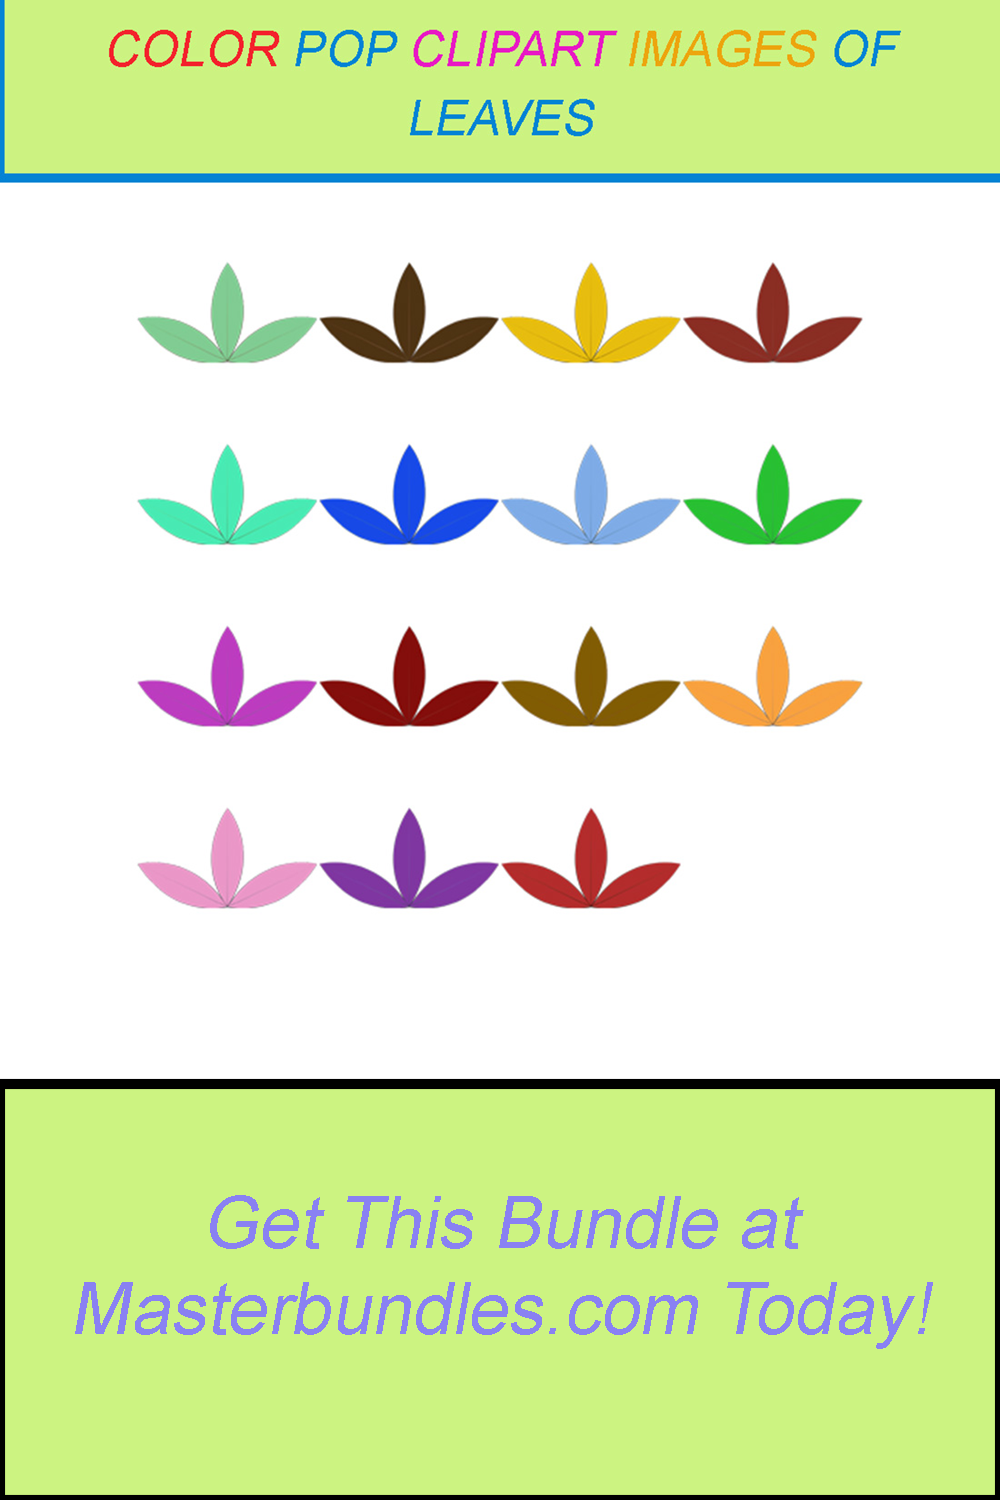 15 COLOR POP CLIPART IMAGES OF LEAVES pinterest preview image.